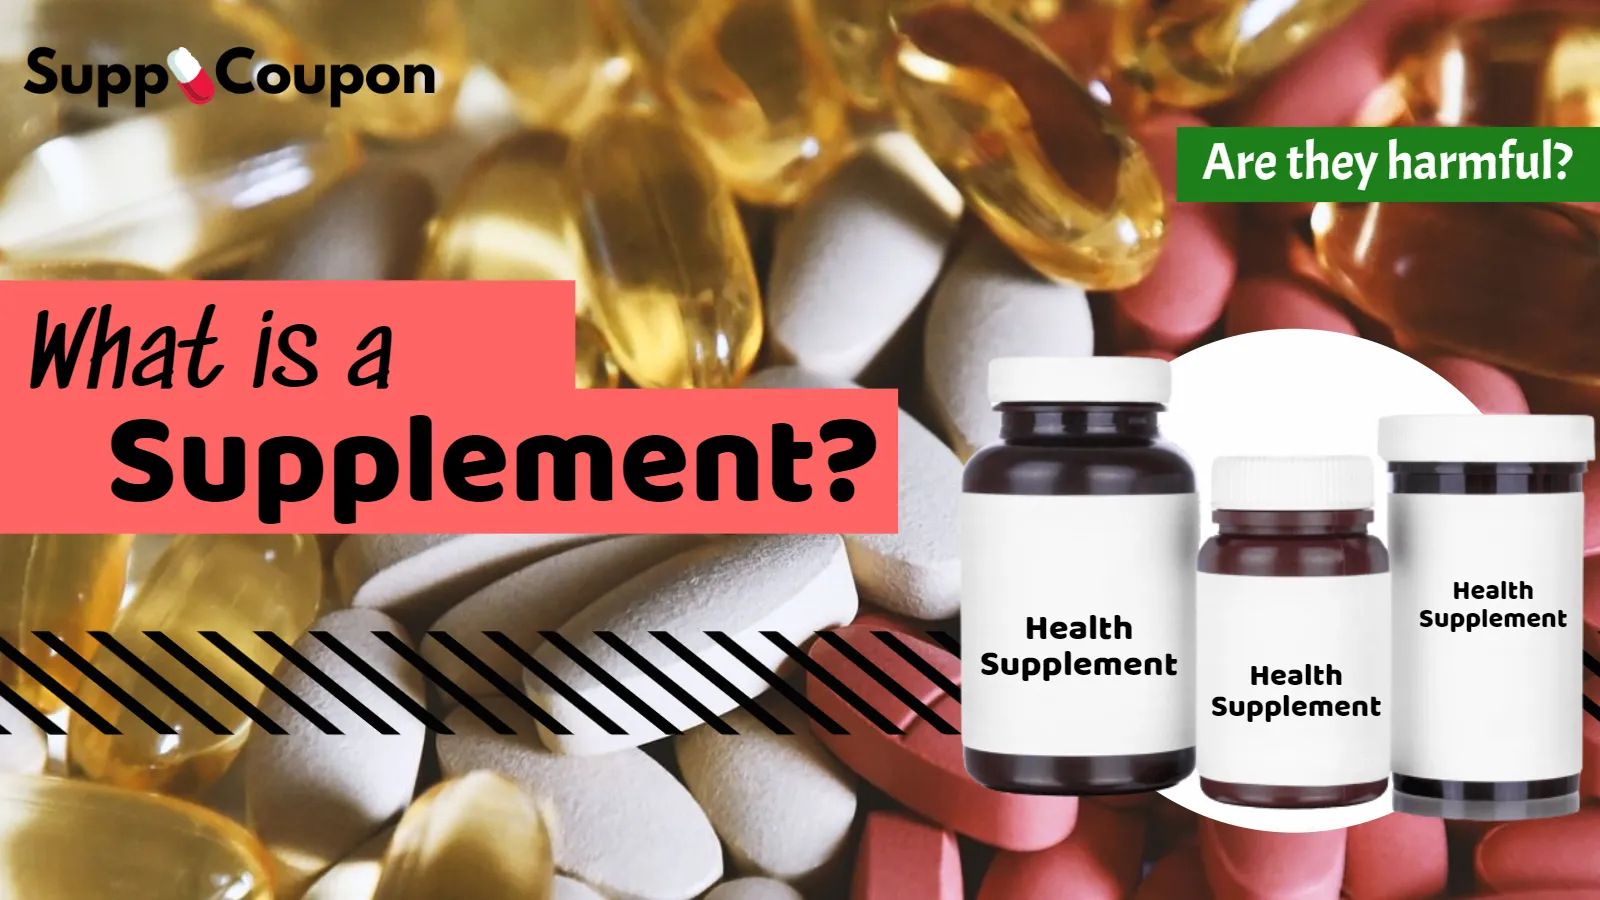 What is a Supplement